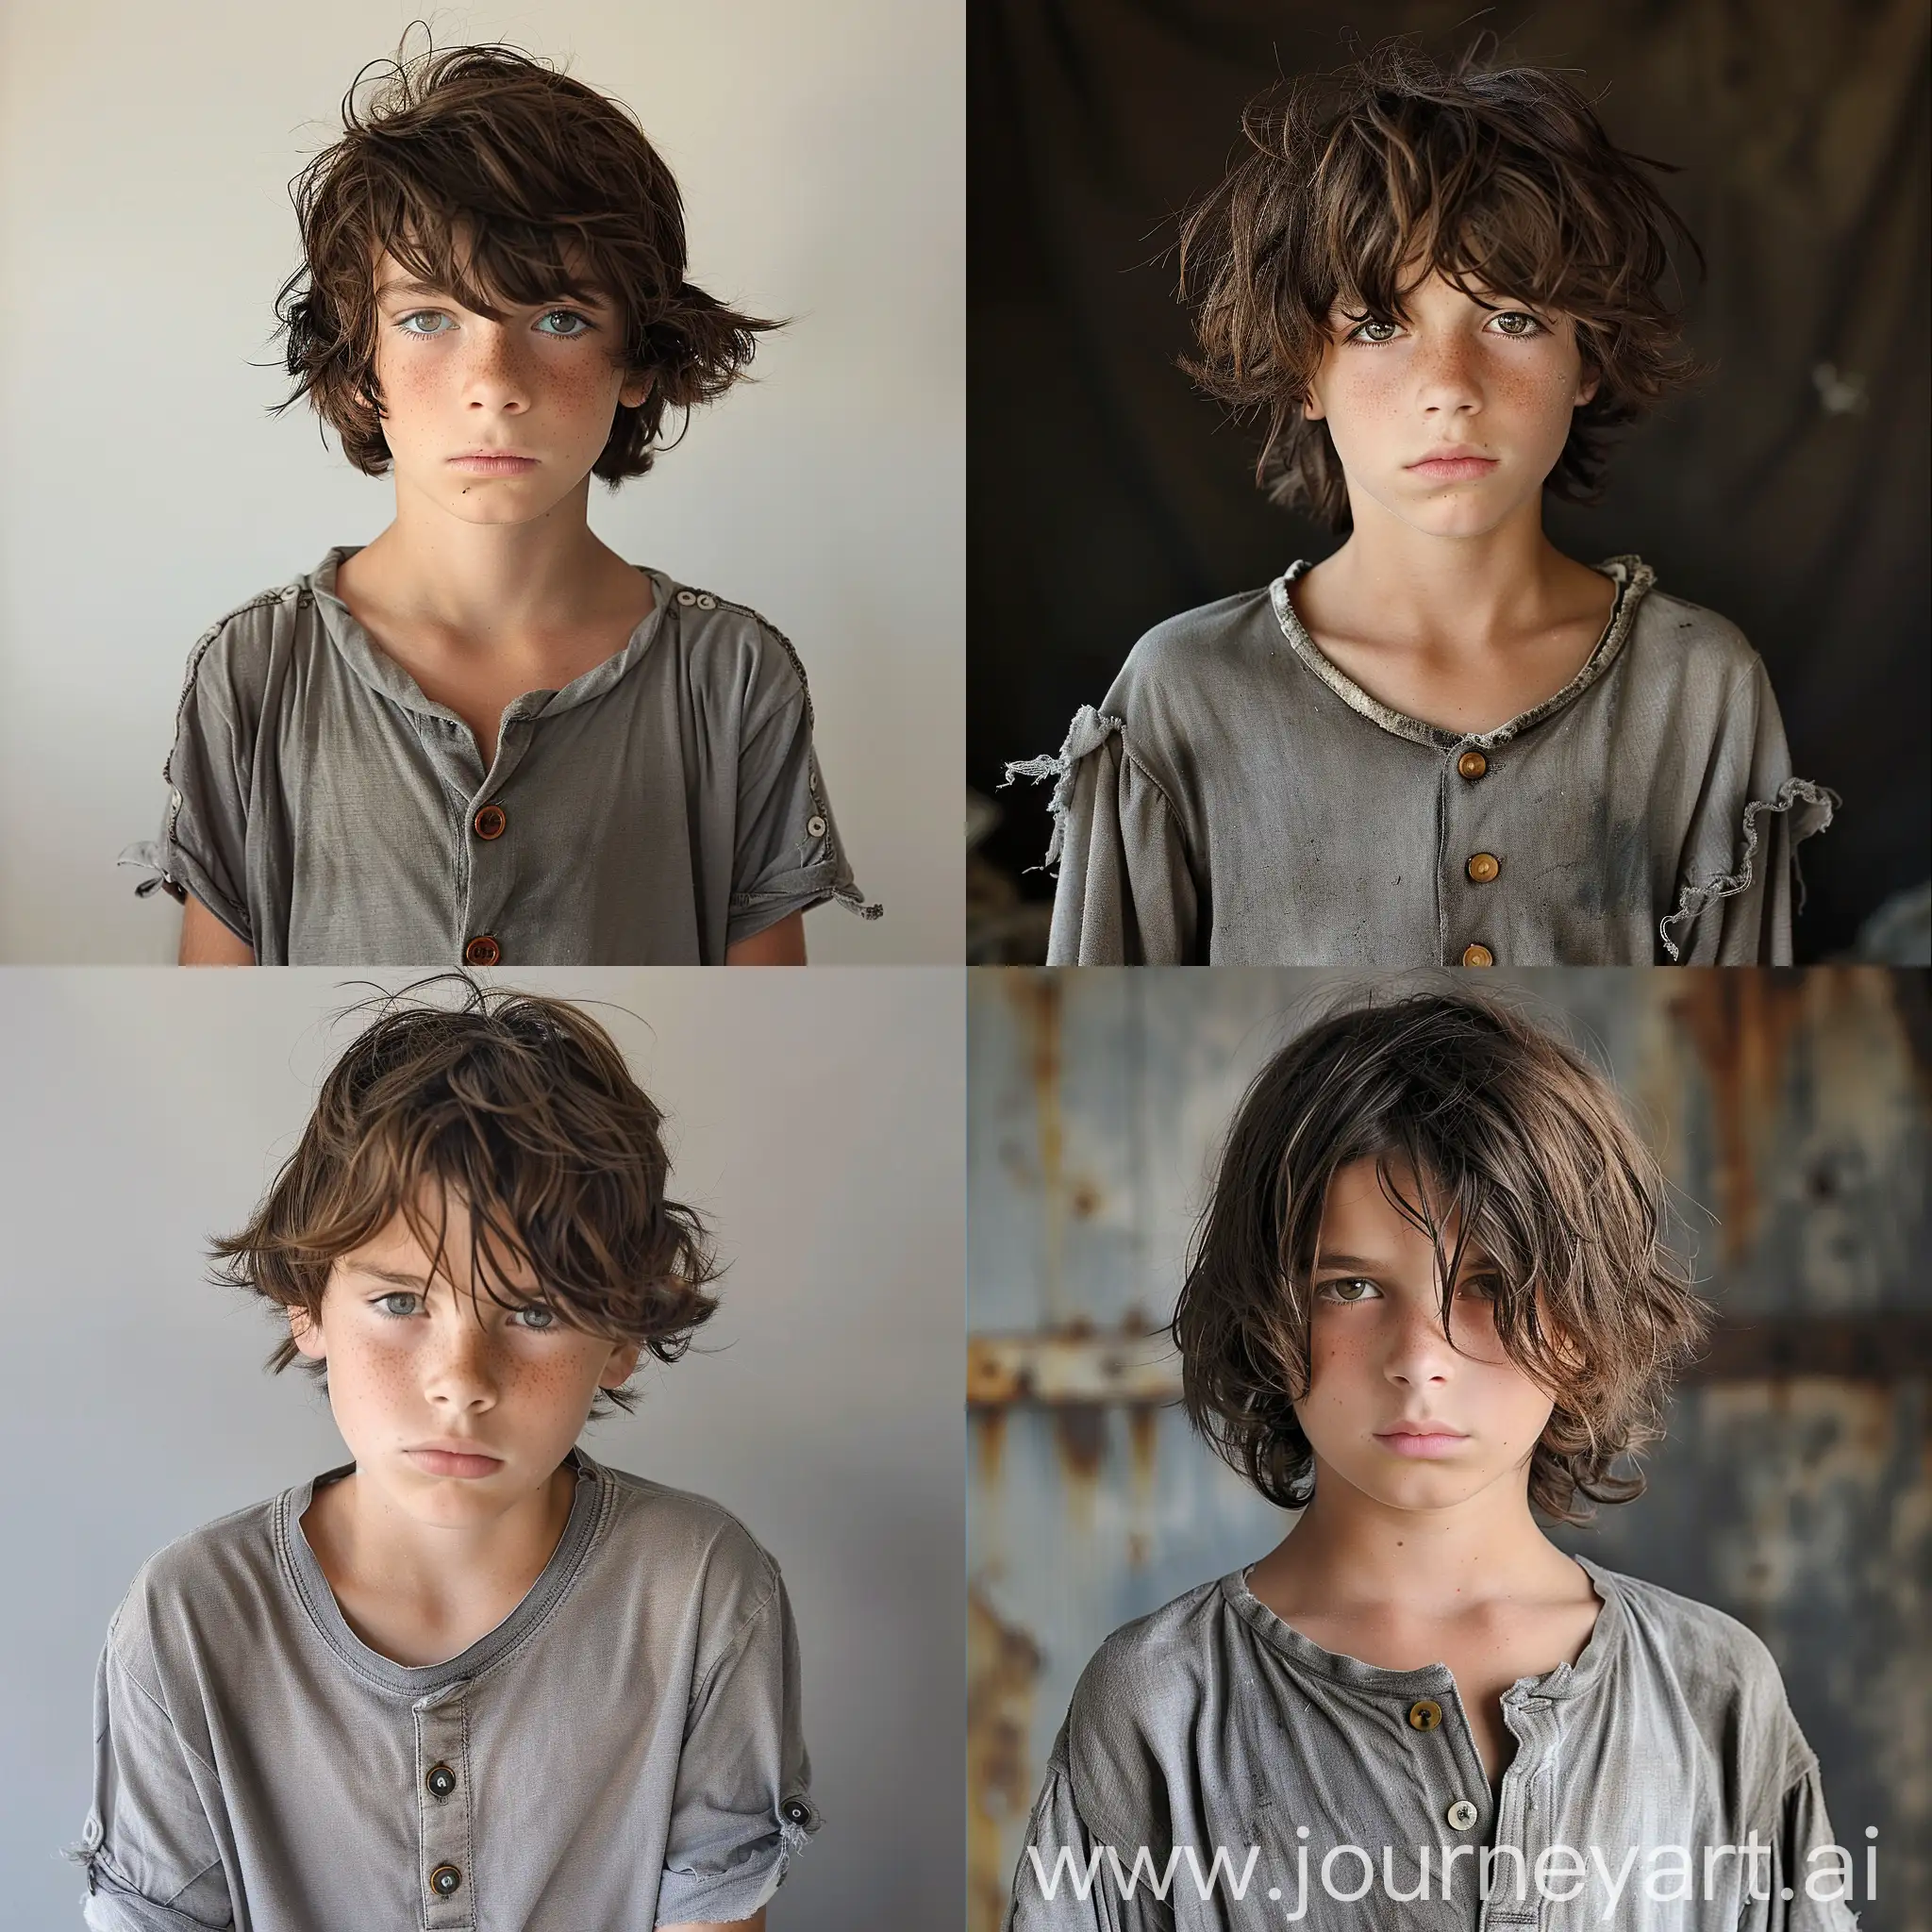 a 14-year-old boy with matted brown hair of medium length in a gray shirt with buttons unbuttoned on the sleeves